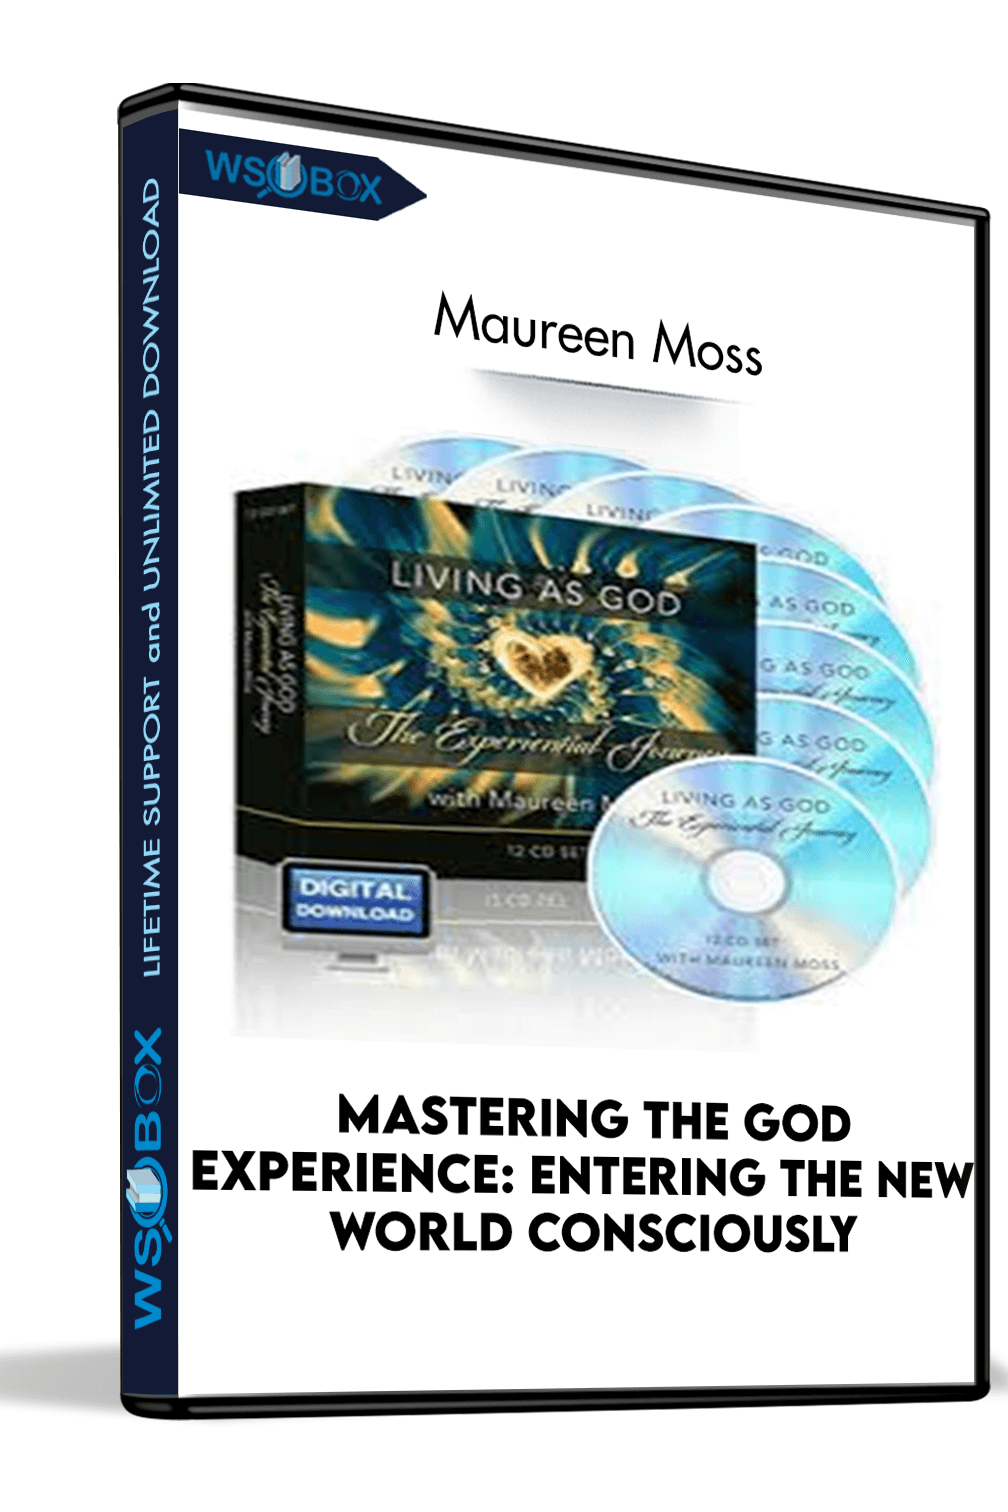 Mastering The God Experience: Entering The New World Consciously - Maureen Moss